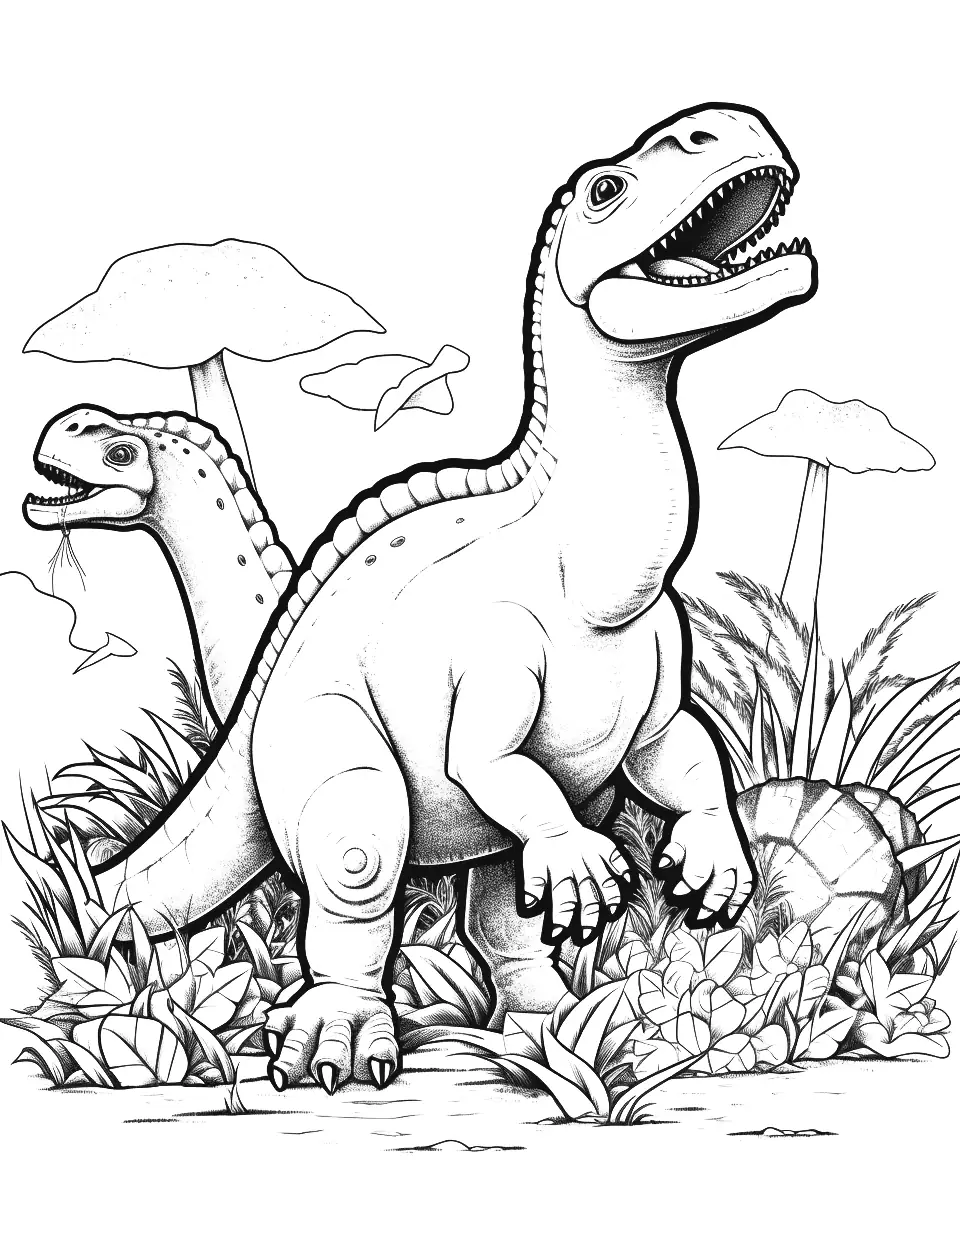 Jurassic World Dino Run Coloring Page - Dinosaurs escaping from their enclosures in Jurassic World.